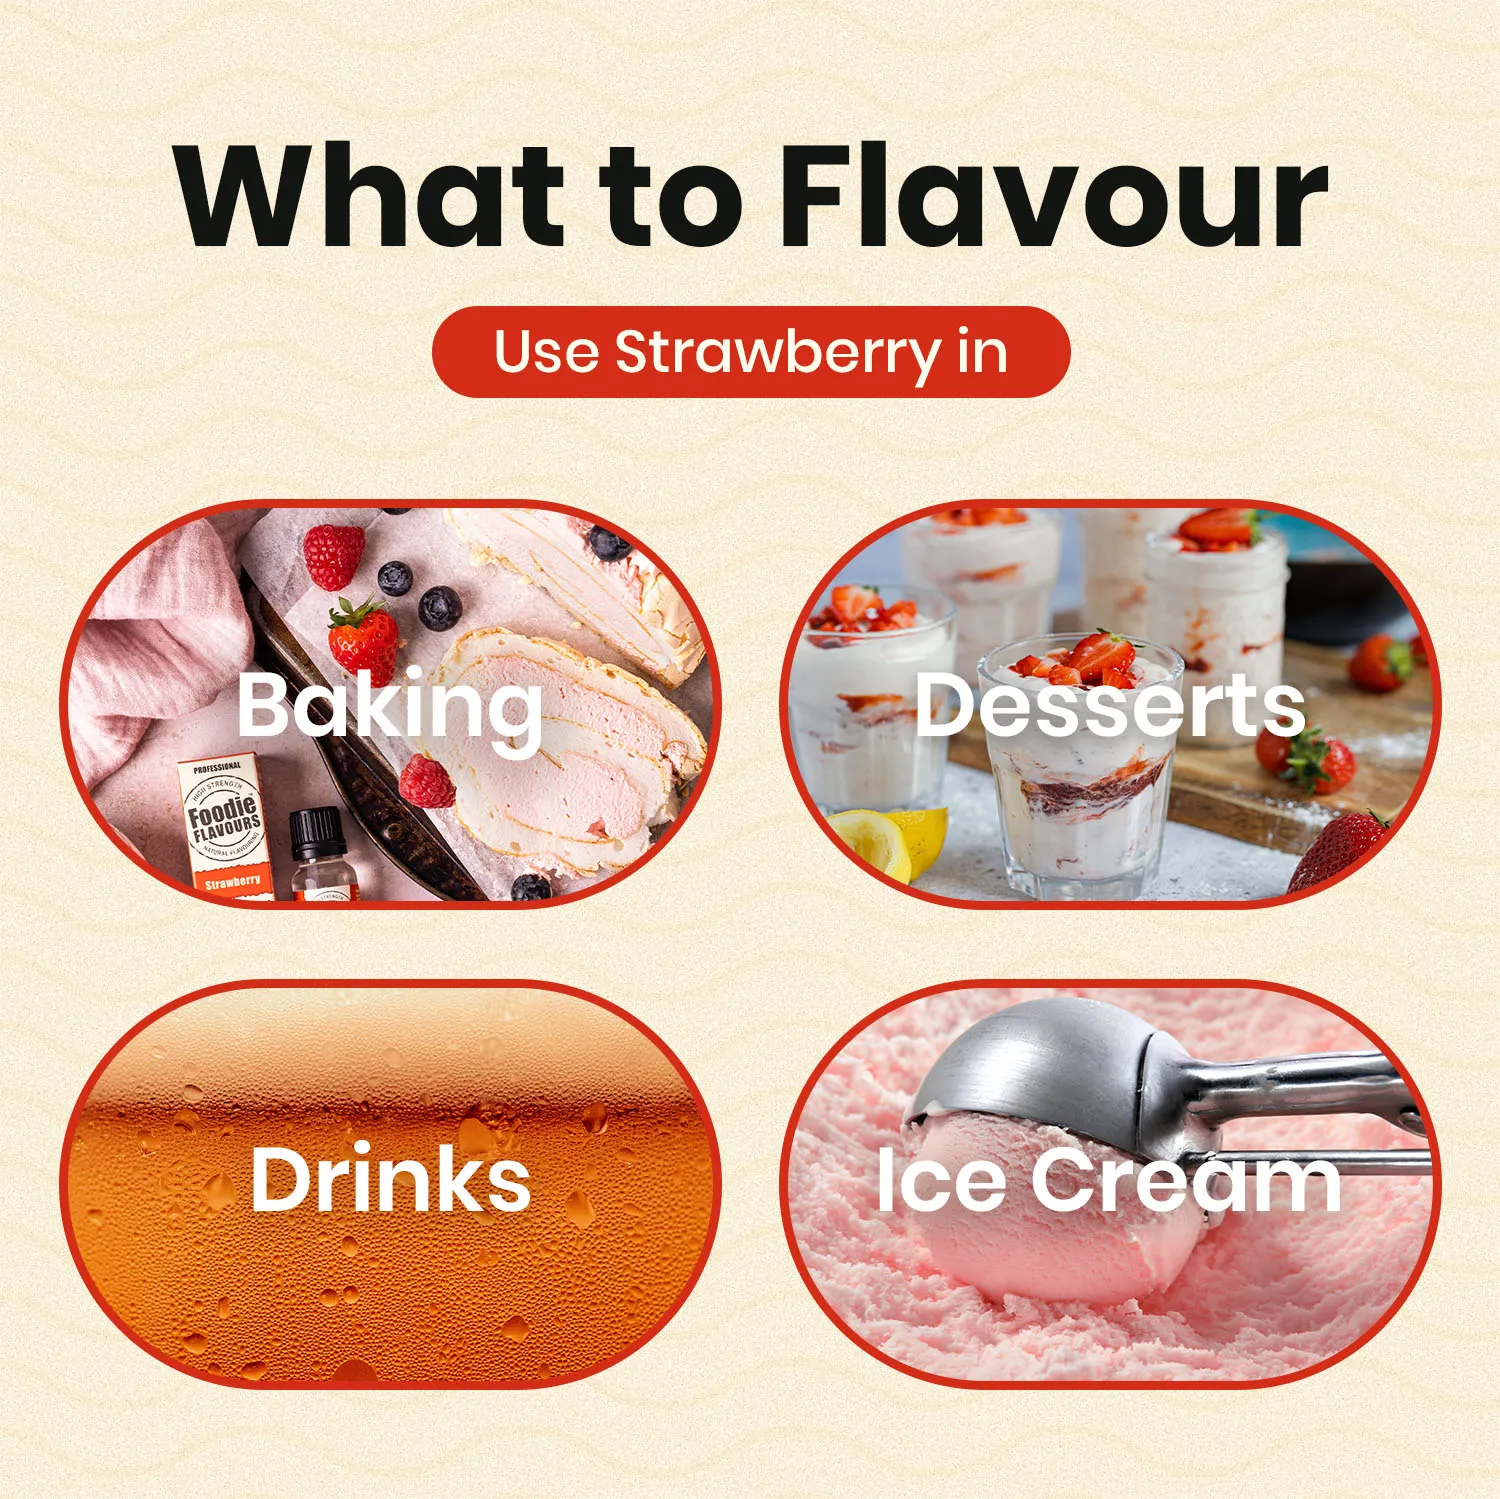 Strawberry Natural Flavouring - what to flavour